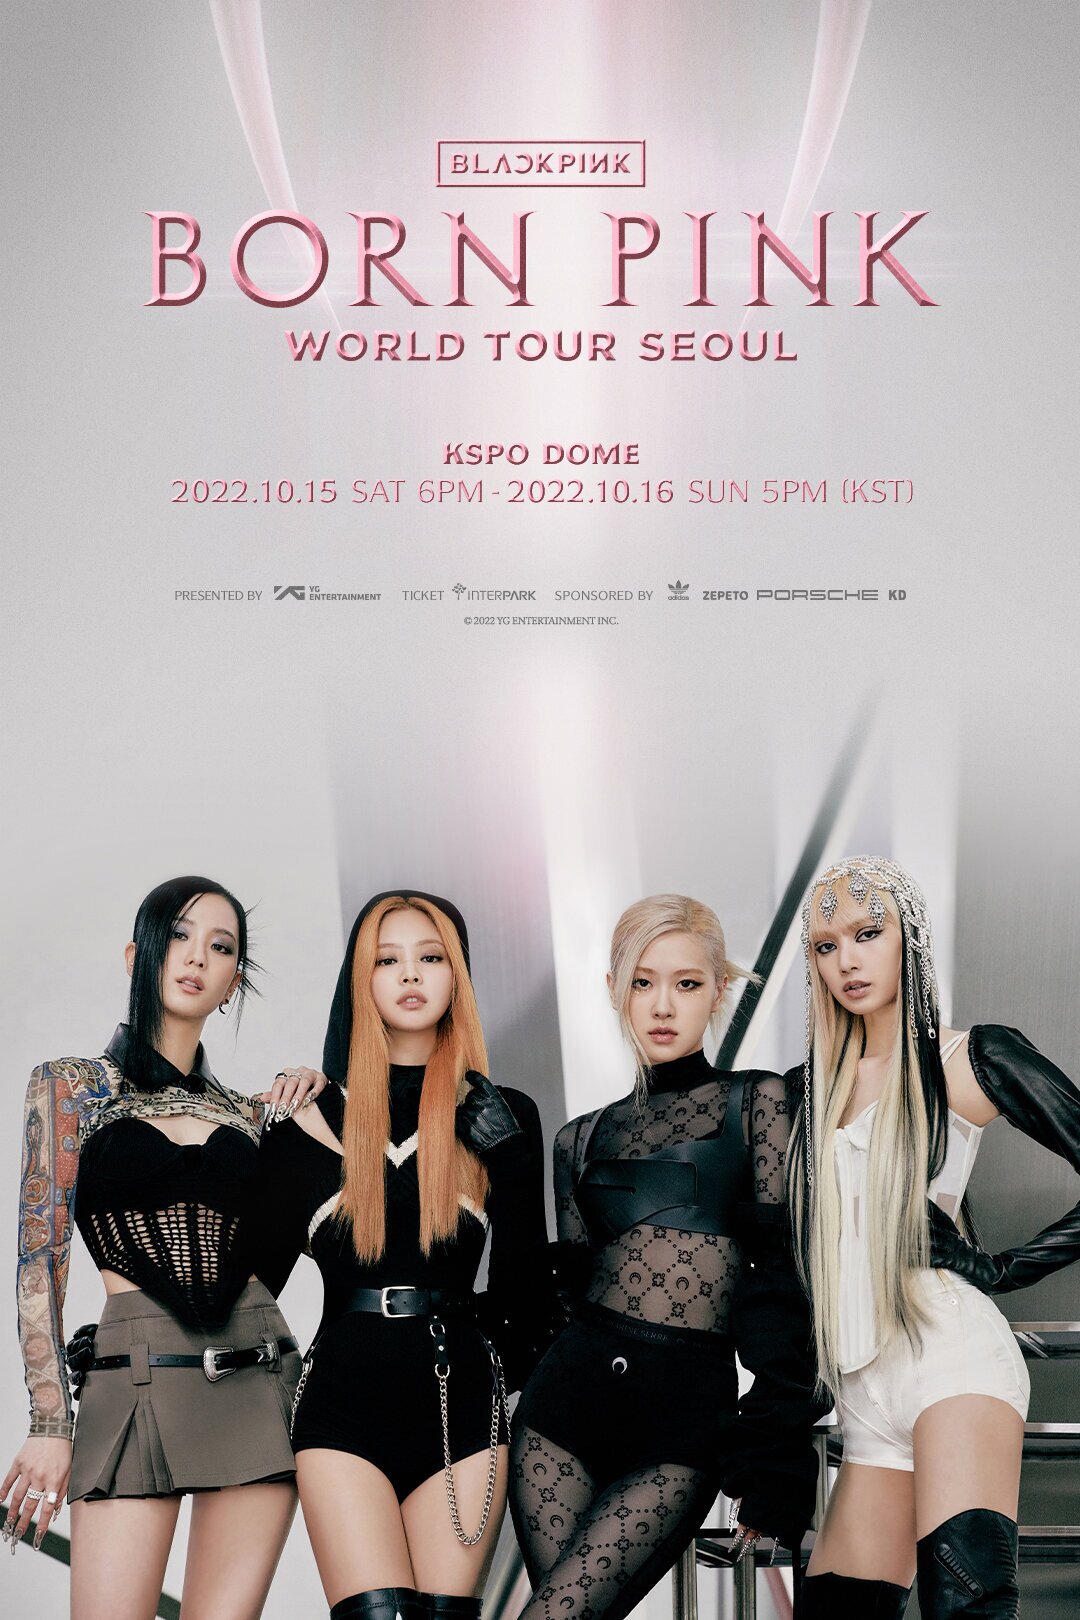 BLACKPINK 'Born Pink World Tour Seoul' Teaser Posters kpopping